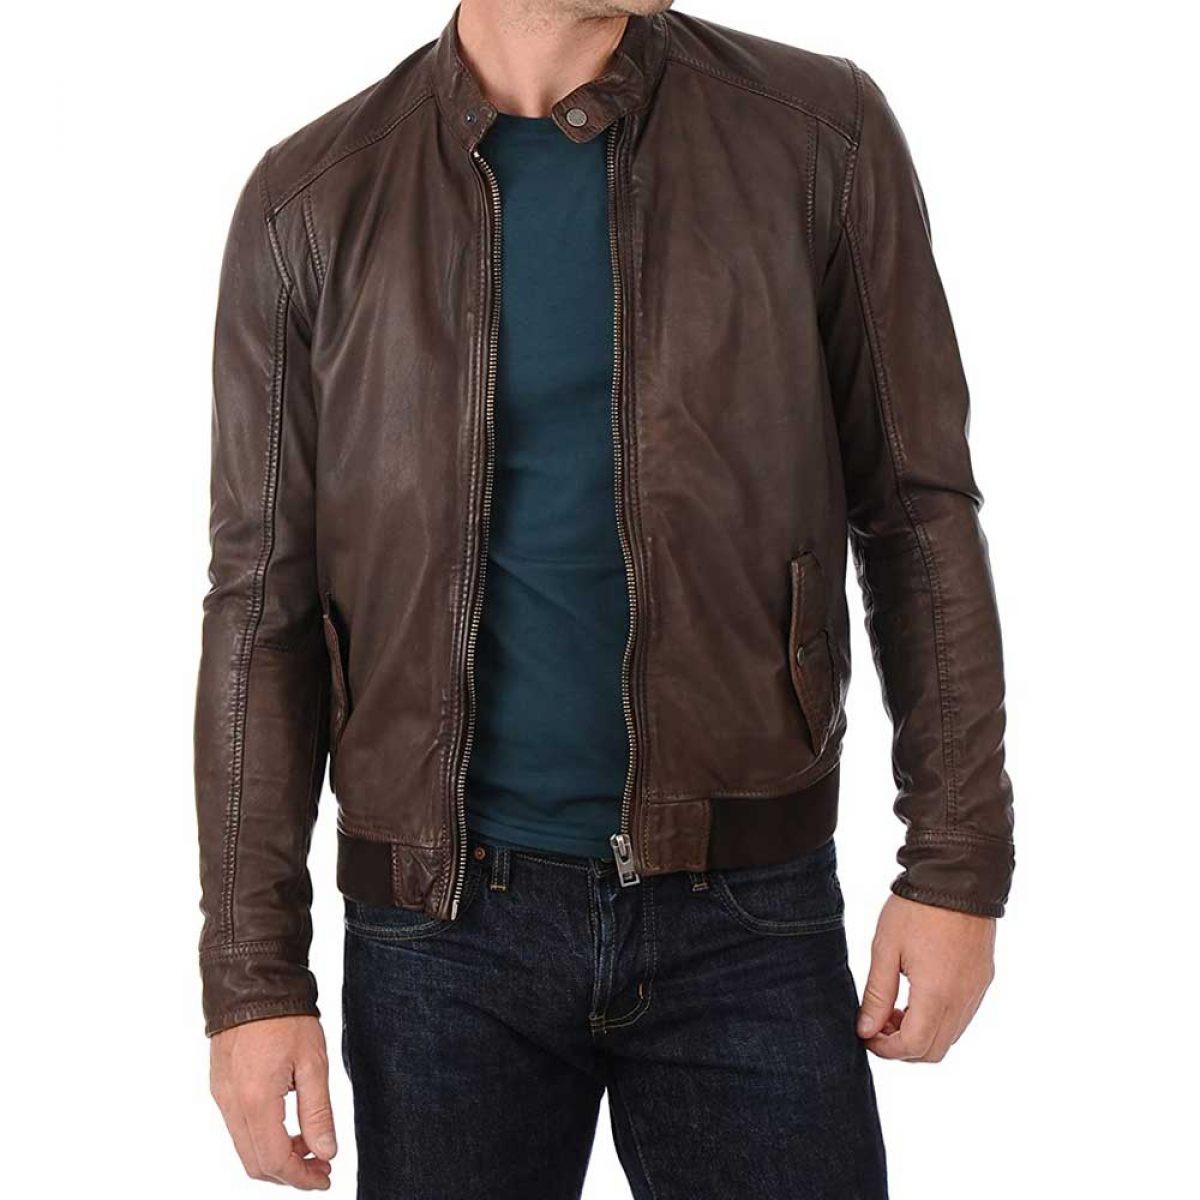 Men's Brown Bomber Leather Jacket with Rib Collar - The Leather Jacketer